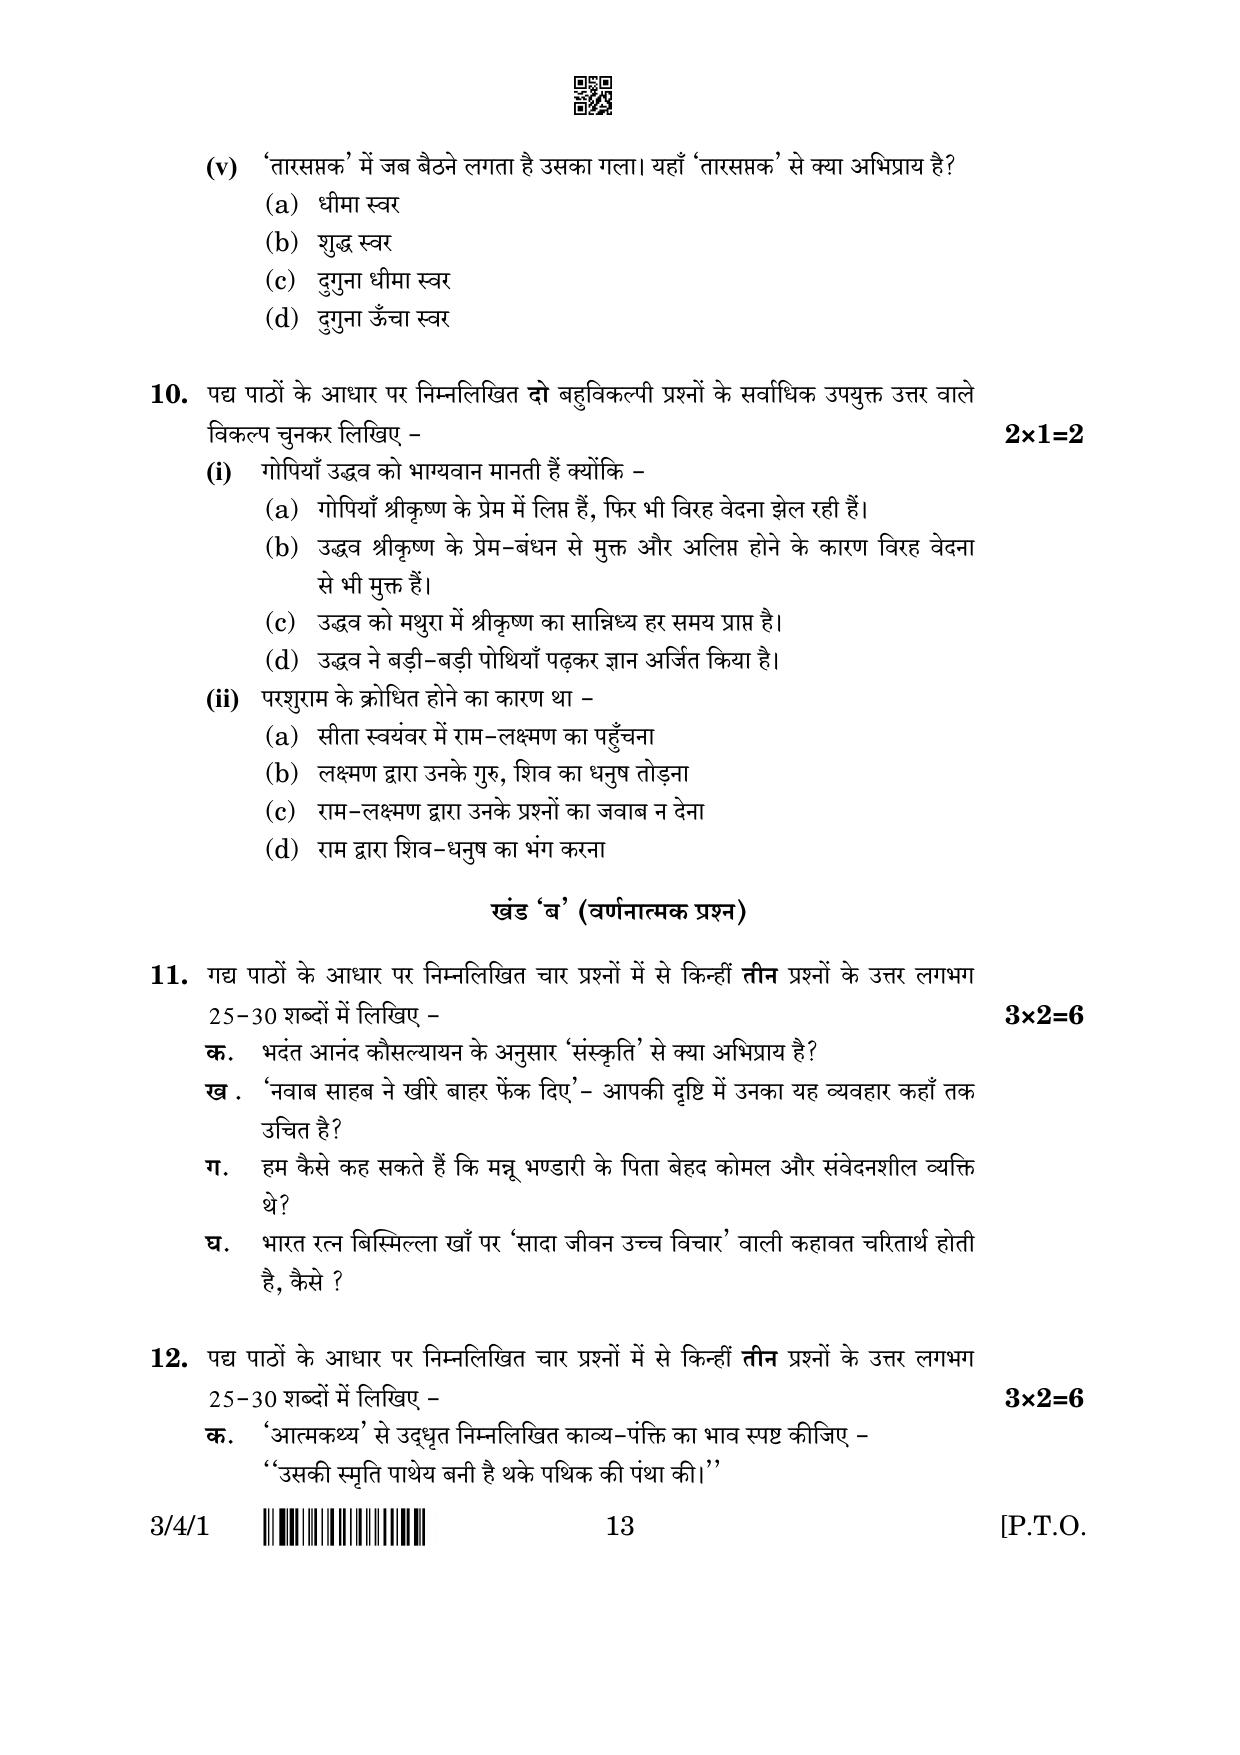 CBSE Class 10 3-4-1 Hindi A 2023 Question Paper - Page 13